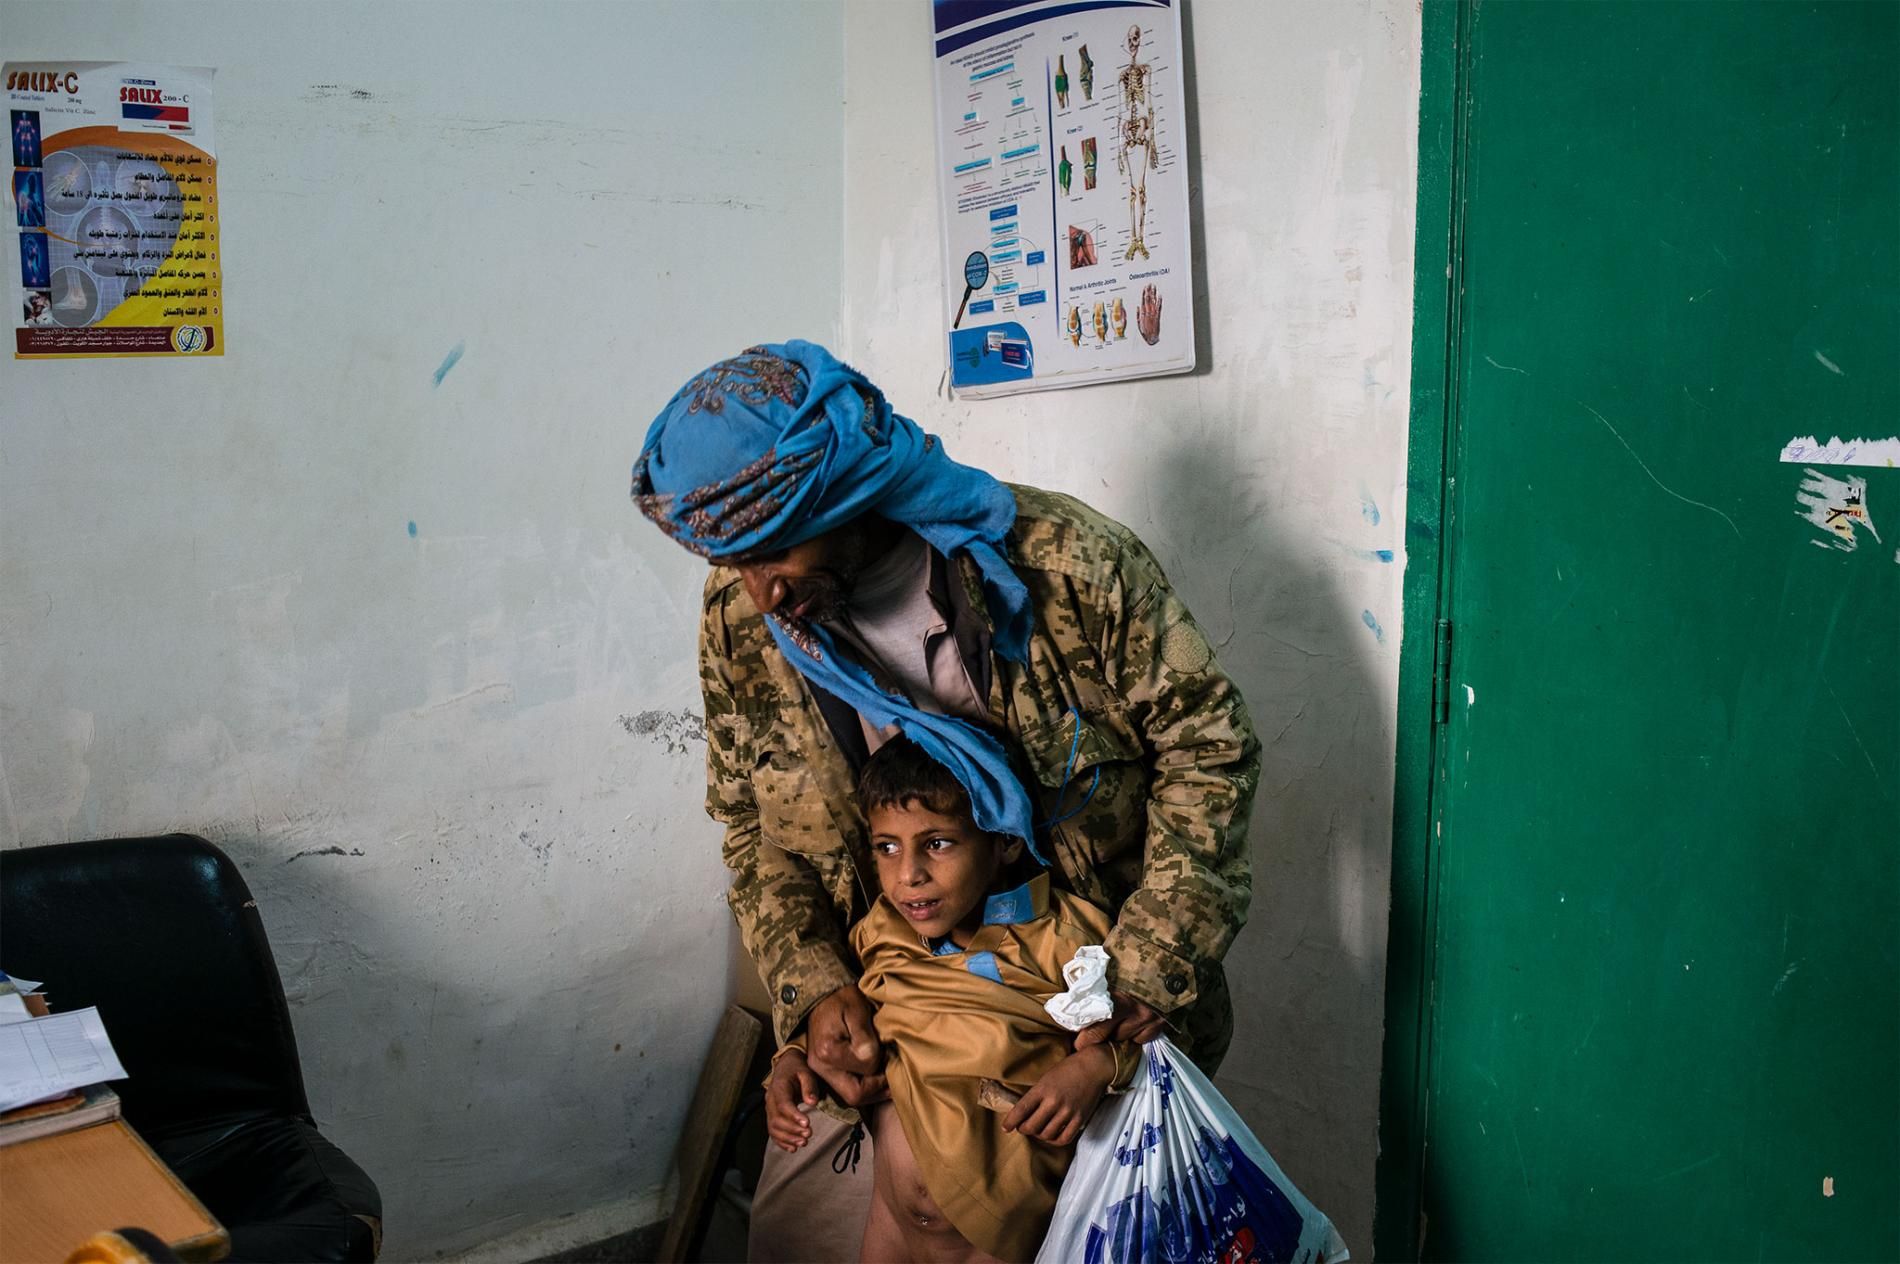 Rasheed al Suwaidy shows a urologist the fistula on the stomach of his son, Mohammad. The condition causes Mohammad to have trouble urinating, often soiling his clothing, and Rasheed can't afford the surgery necessary to fix it. Image by Alex Potter. Yemen, 2018.